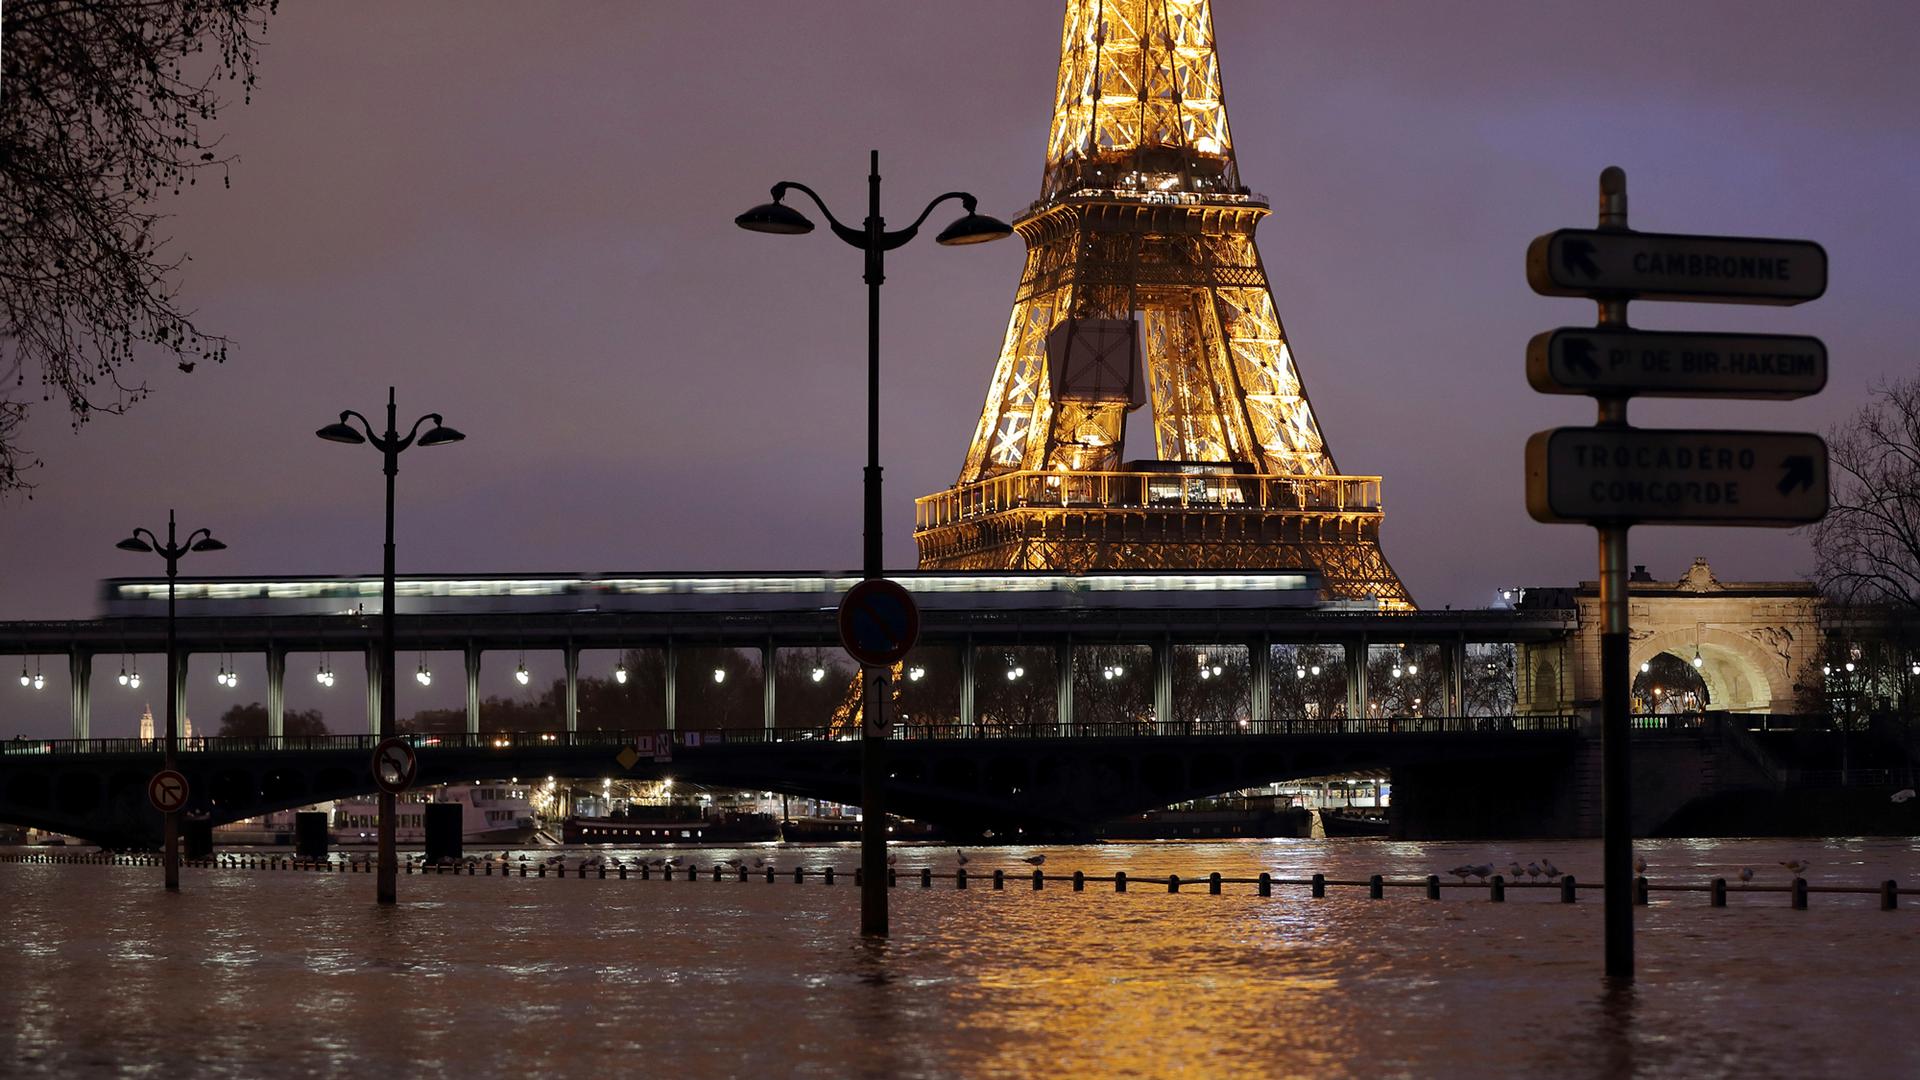 A view shows the flooded banks of the Seine River and the Eiffel Tower.